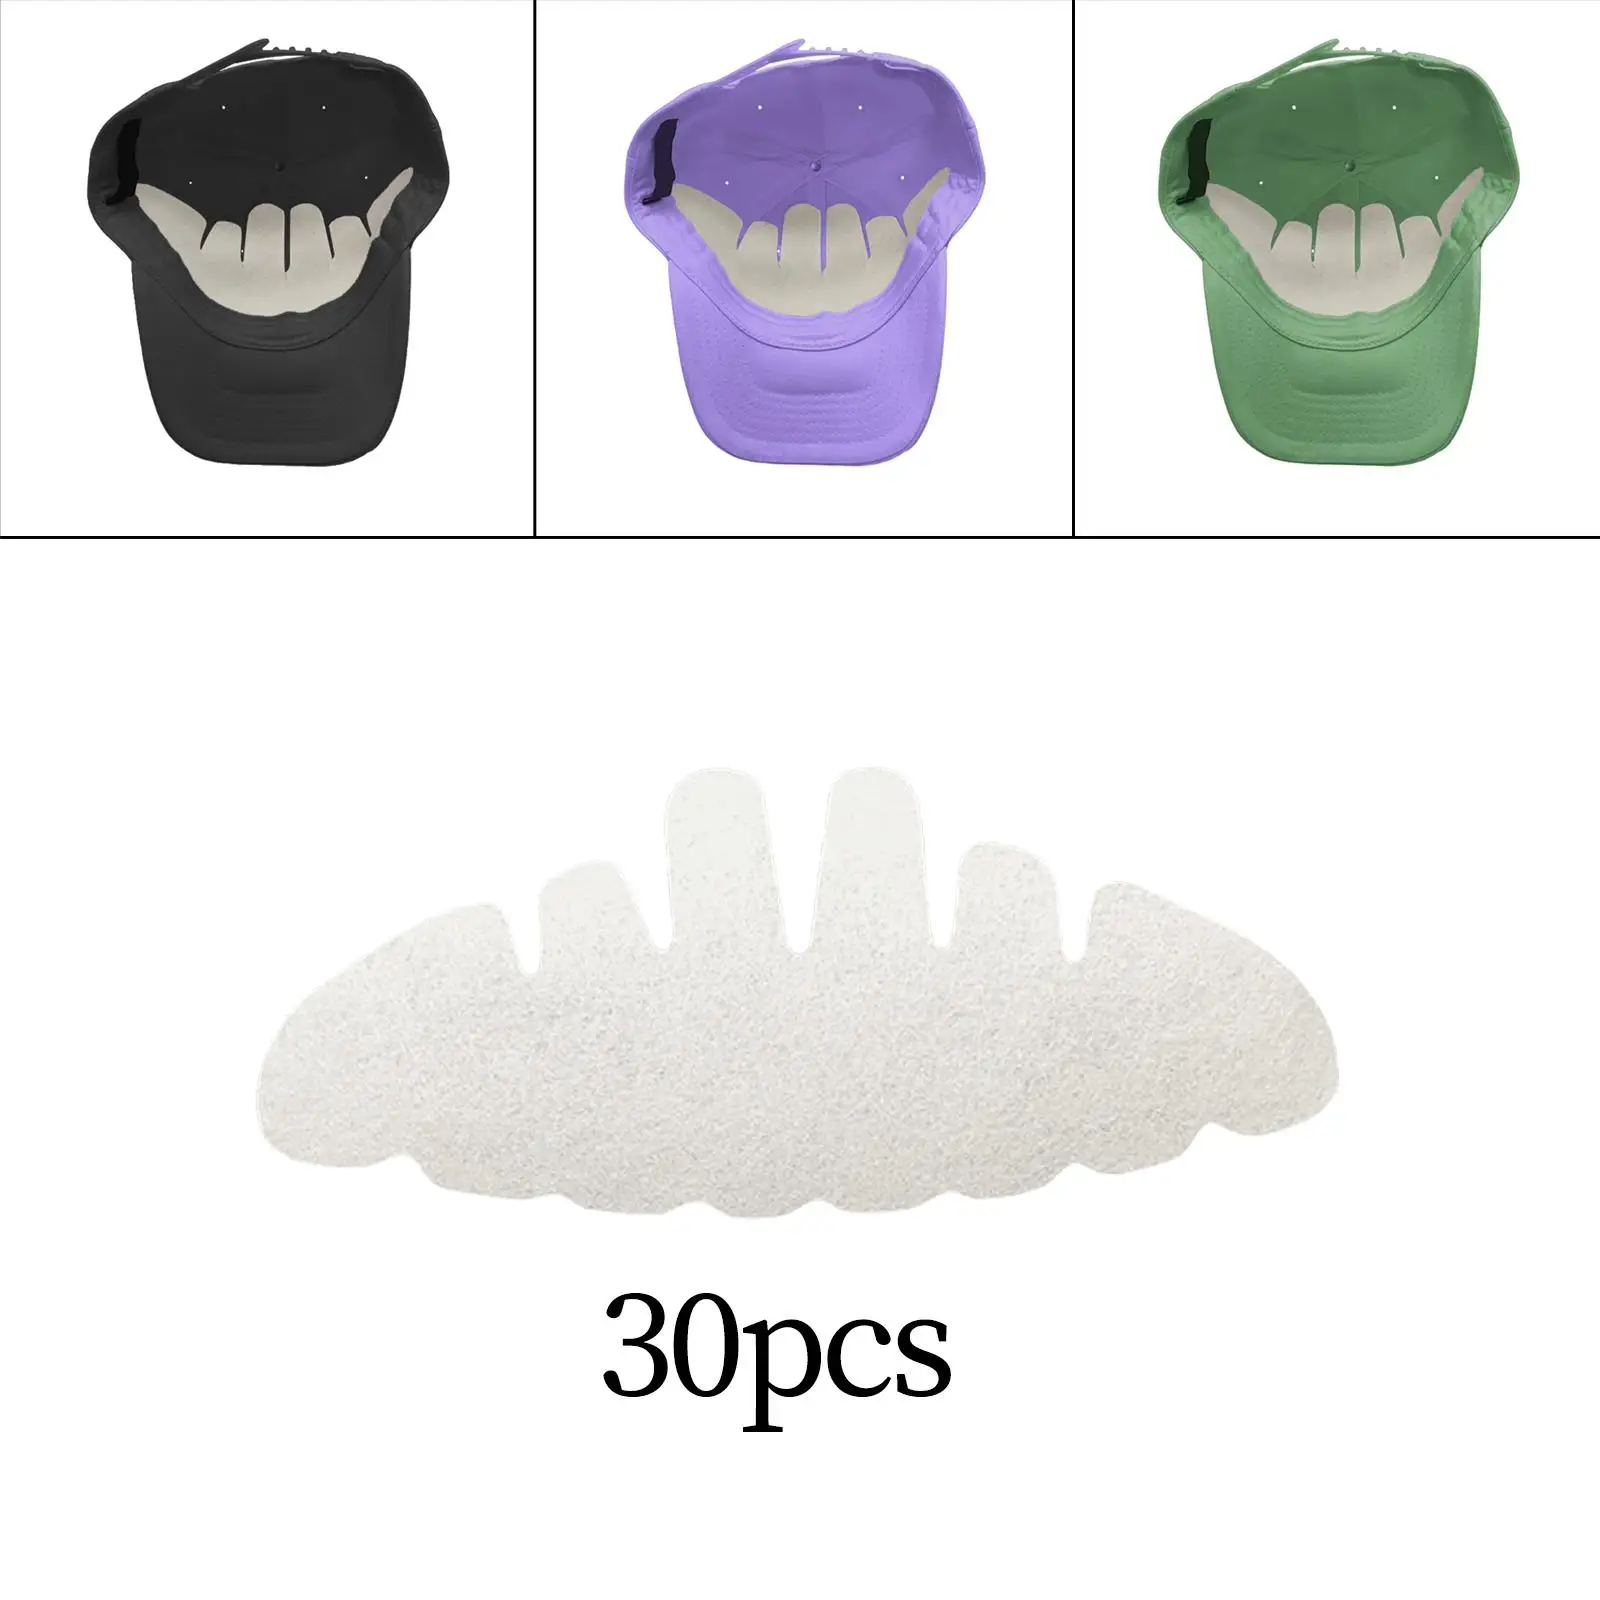 30Pcs Absorbent Sweat Pad Sweatbands Skin Friendly Comfortable Breathable Baseball Cap Sweat Liner Golf Hat Liners for Beach Hat